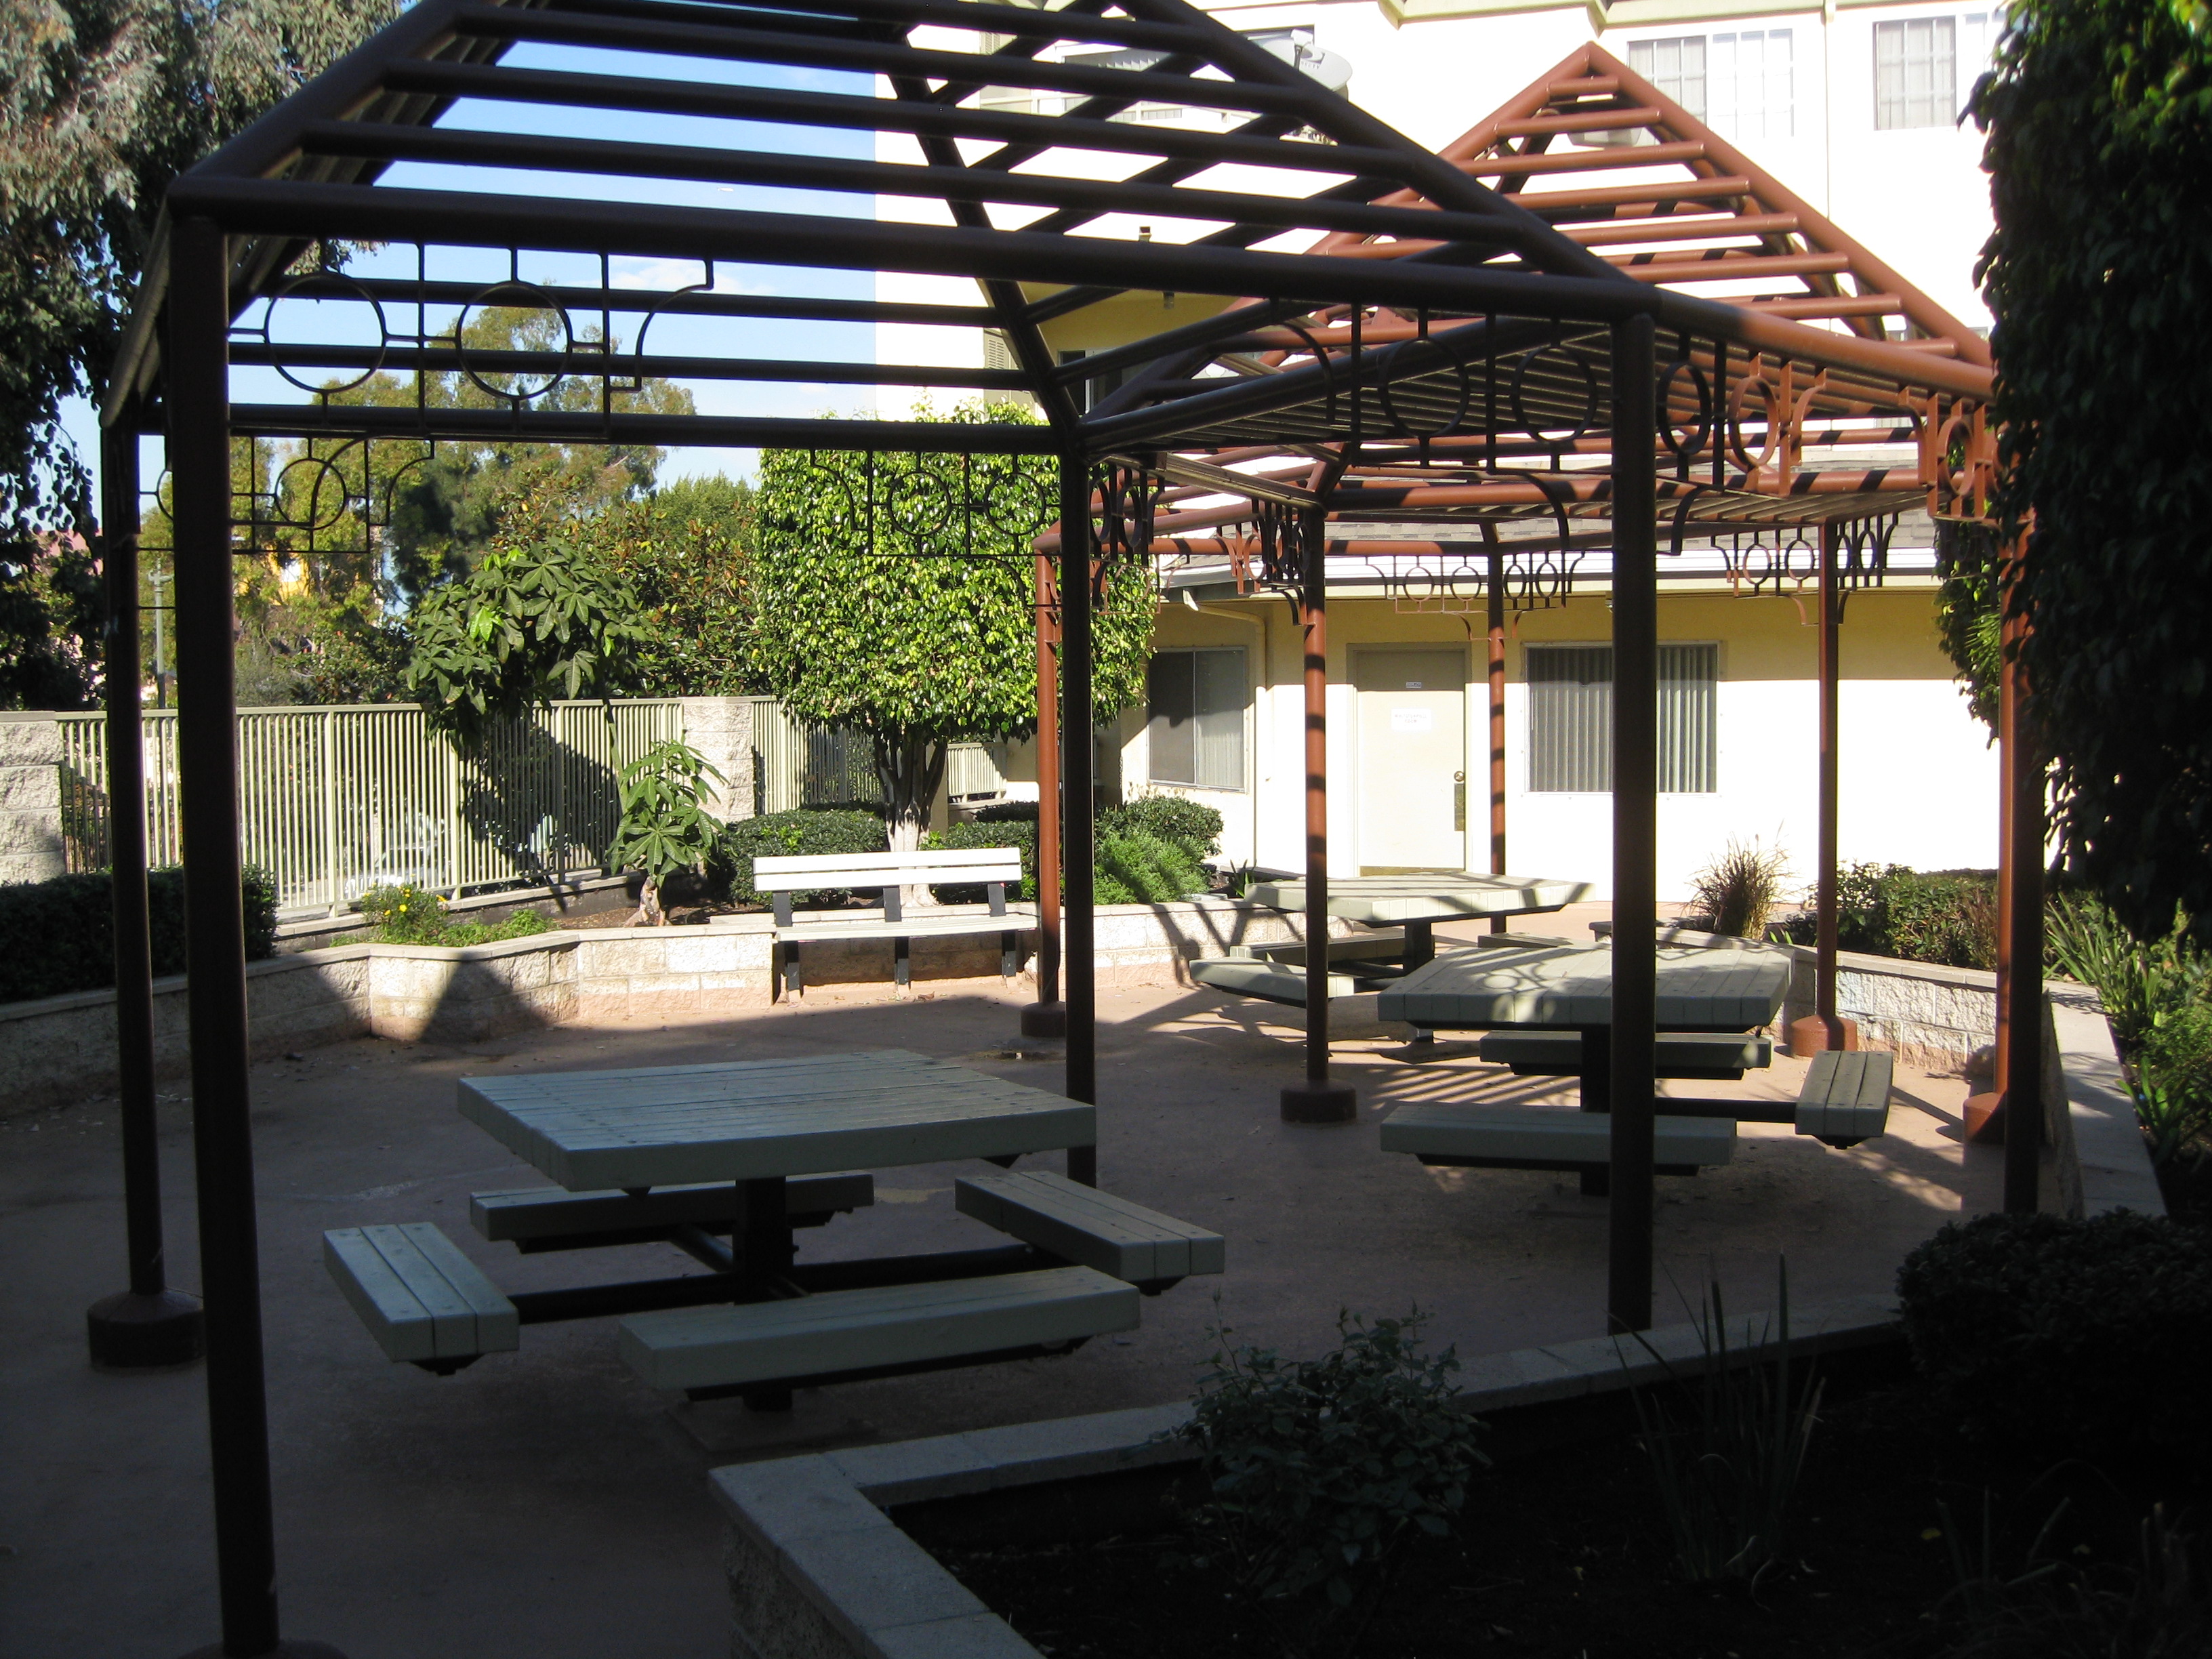 Paradise arms common area. gazebos with table bench seating. raised bed planters circling seating area.